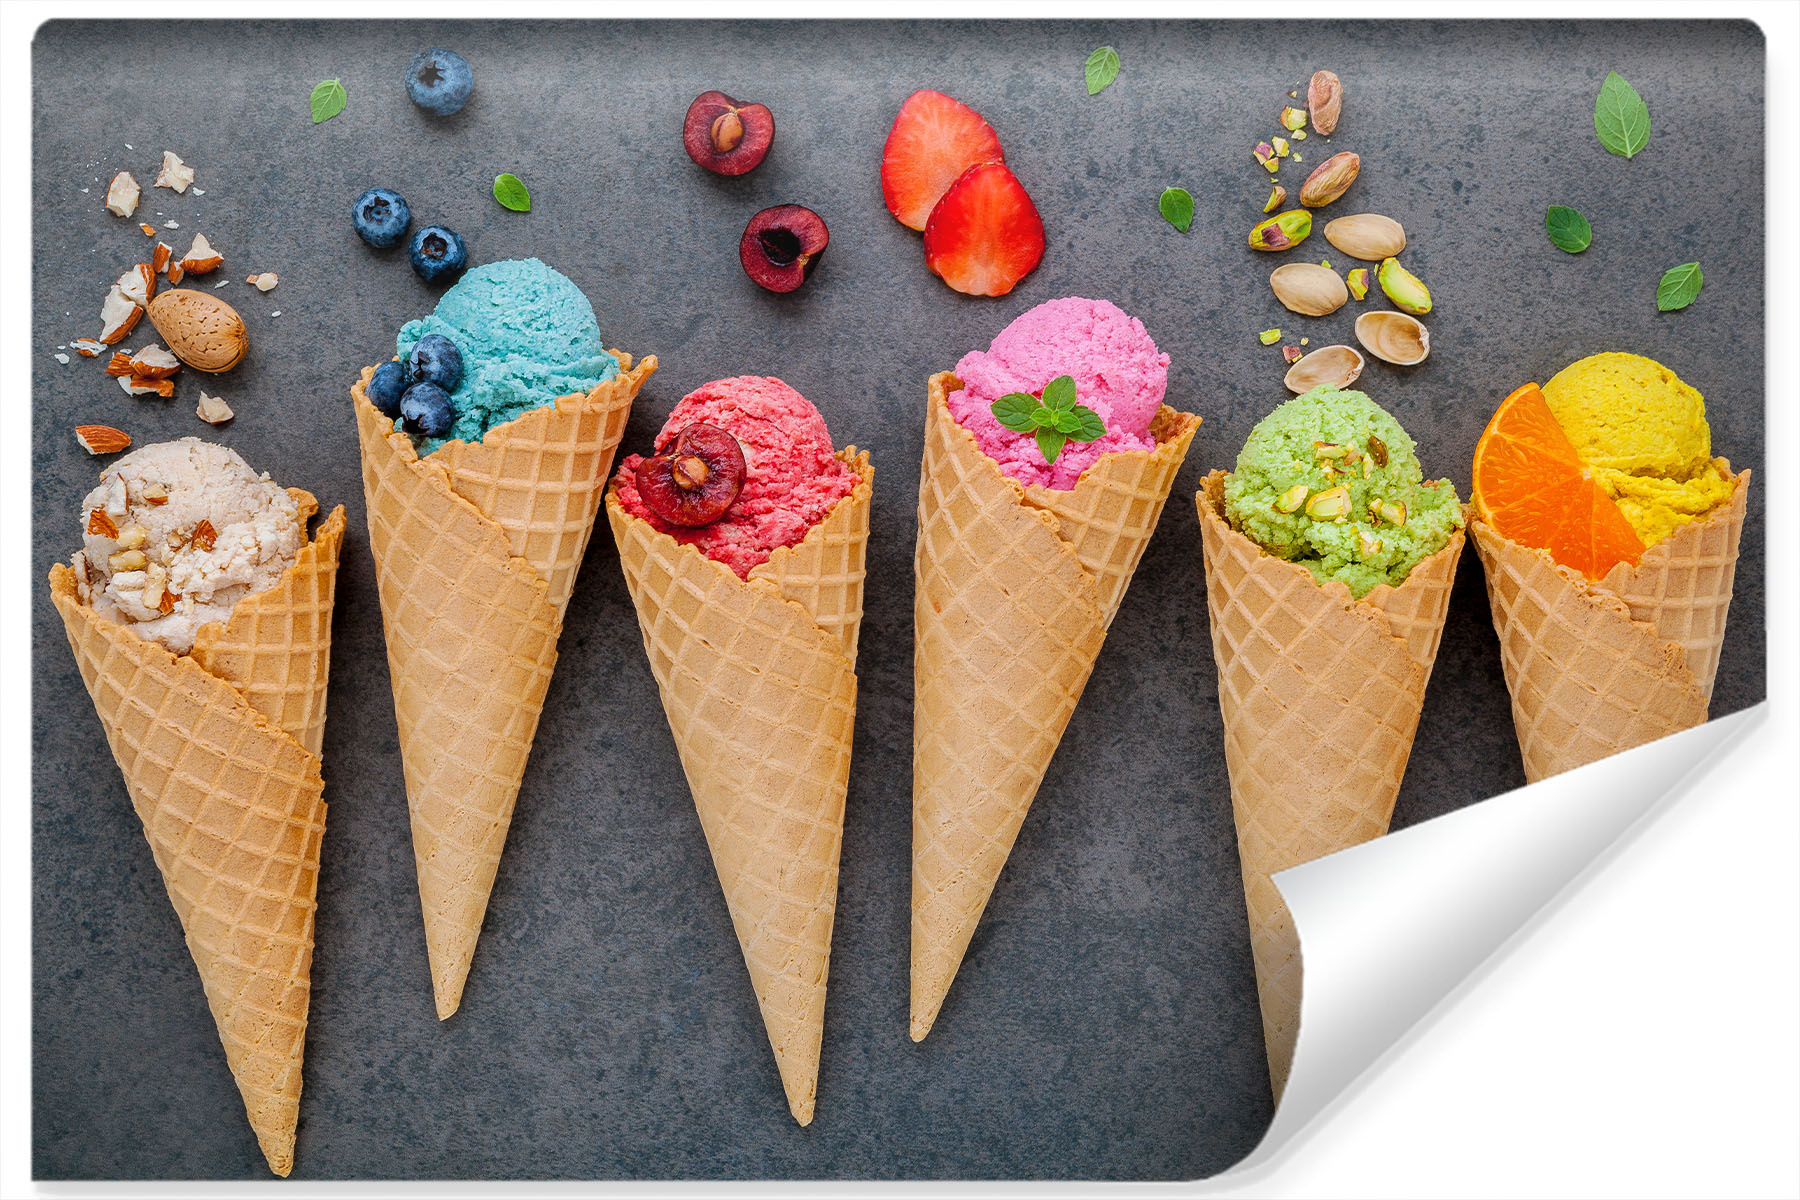 Photo wallpaper Colorful ice-cream in a wafer Non-woven 104 x 70.5 cm FT-3095-VEM